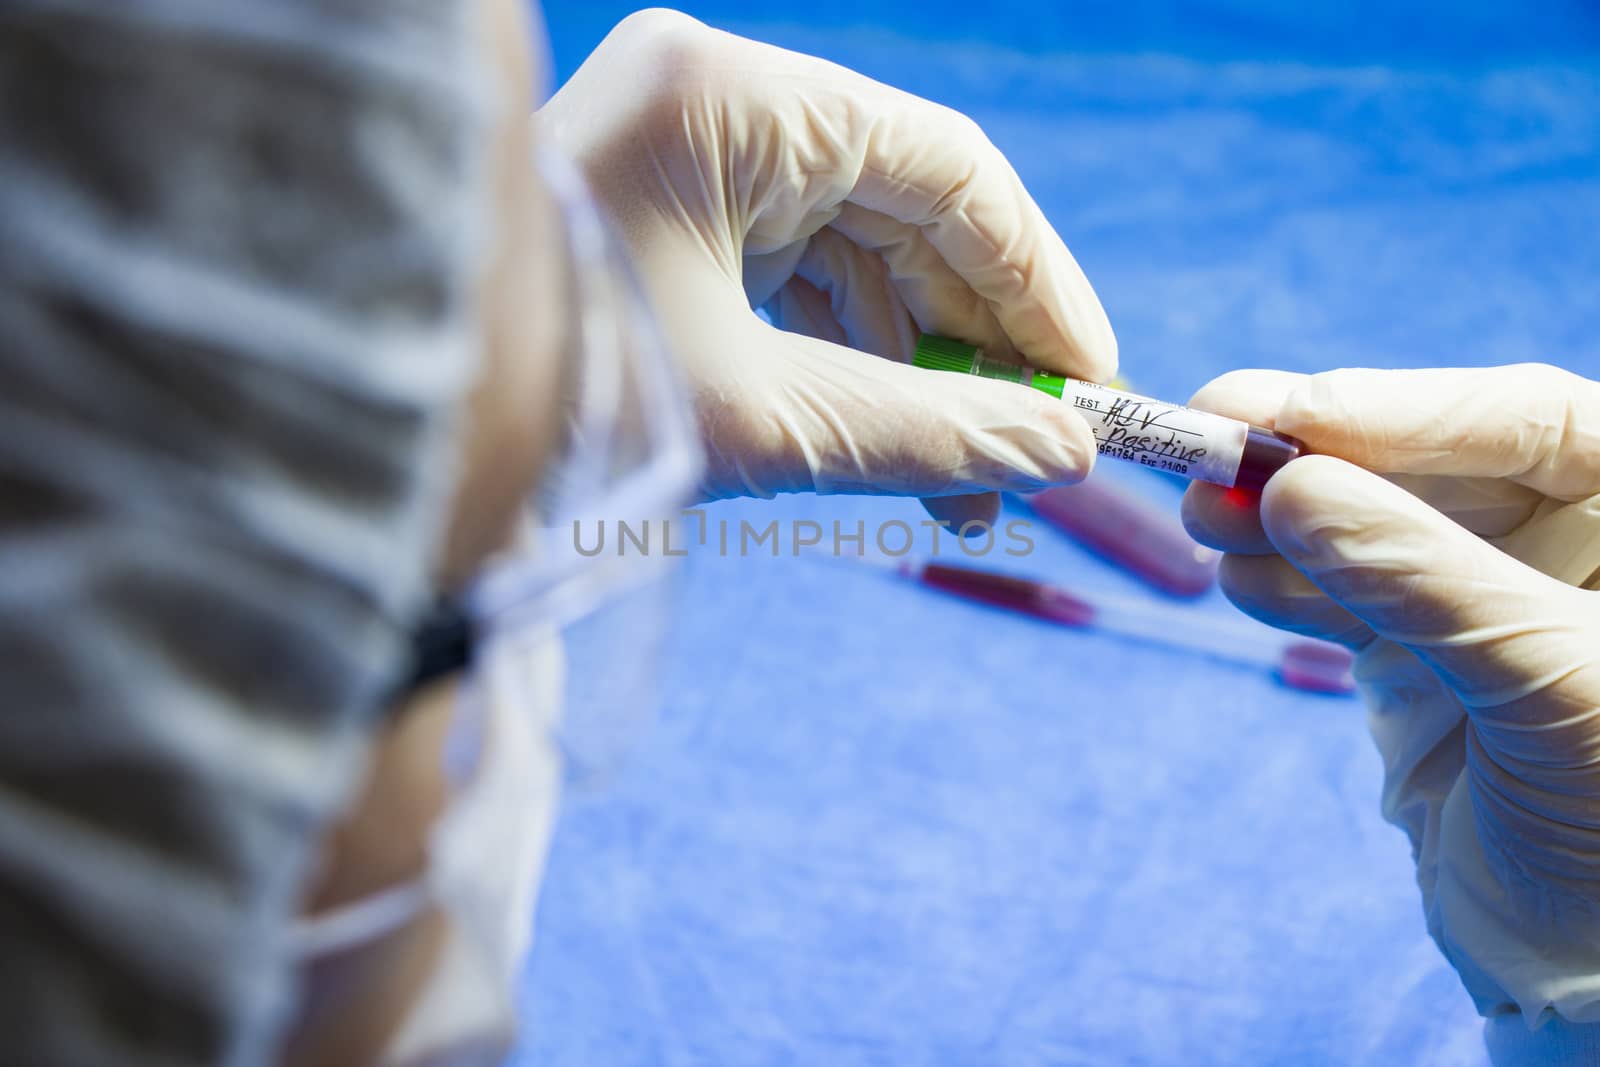 Hiv and aids infection test, doctors face and hand holding tube with blood on the blue background. Studio shoot.